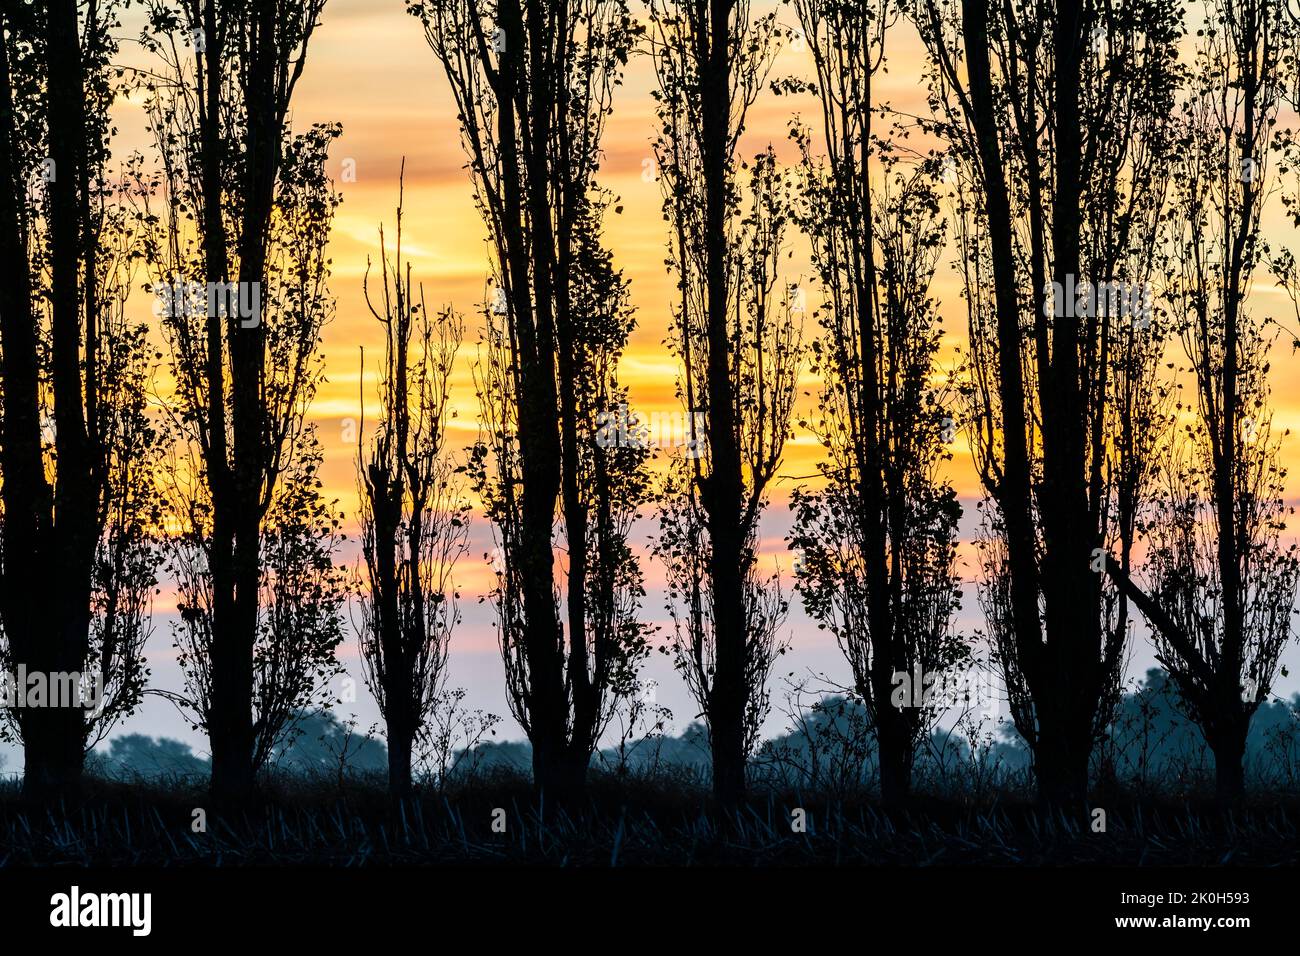 The dawn sky seen through a row of poplar trees in the autumn. Defocused sky behind the trees with streakers of mauve and yellow-orange colour layers. Stock Photo